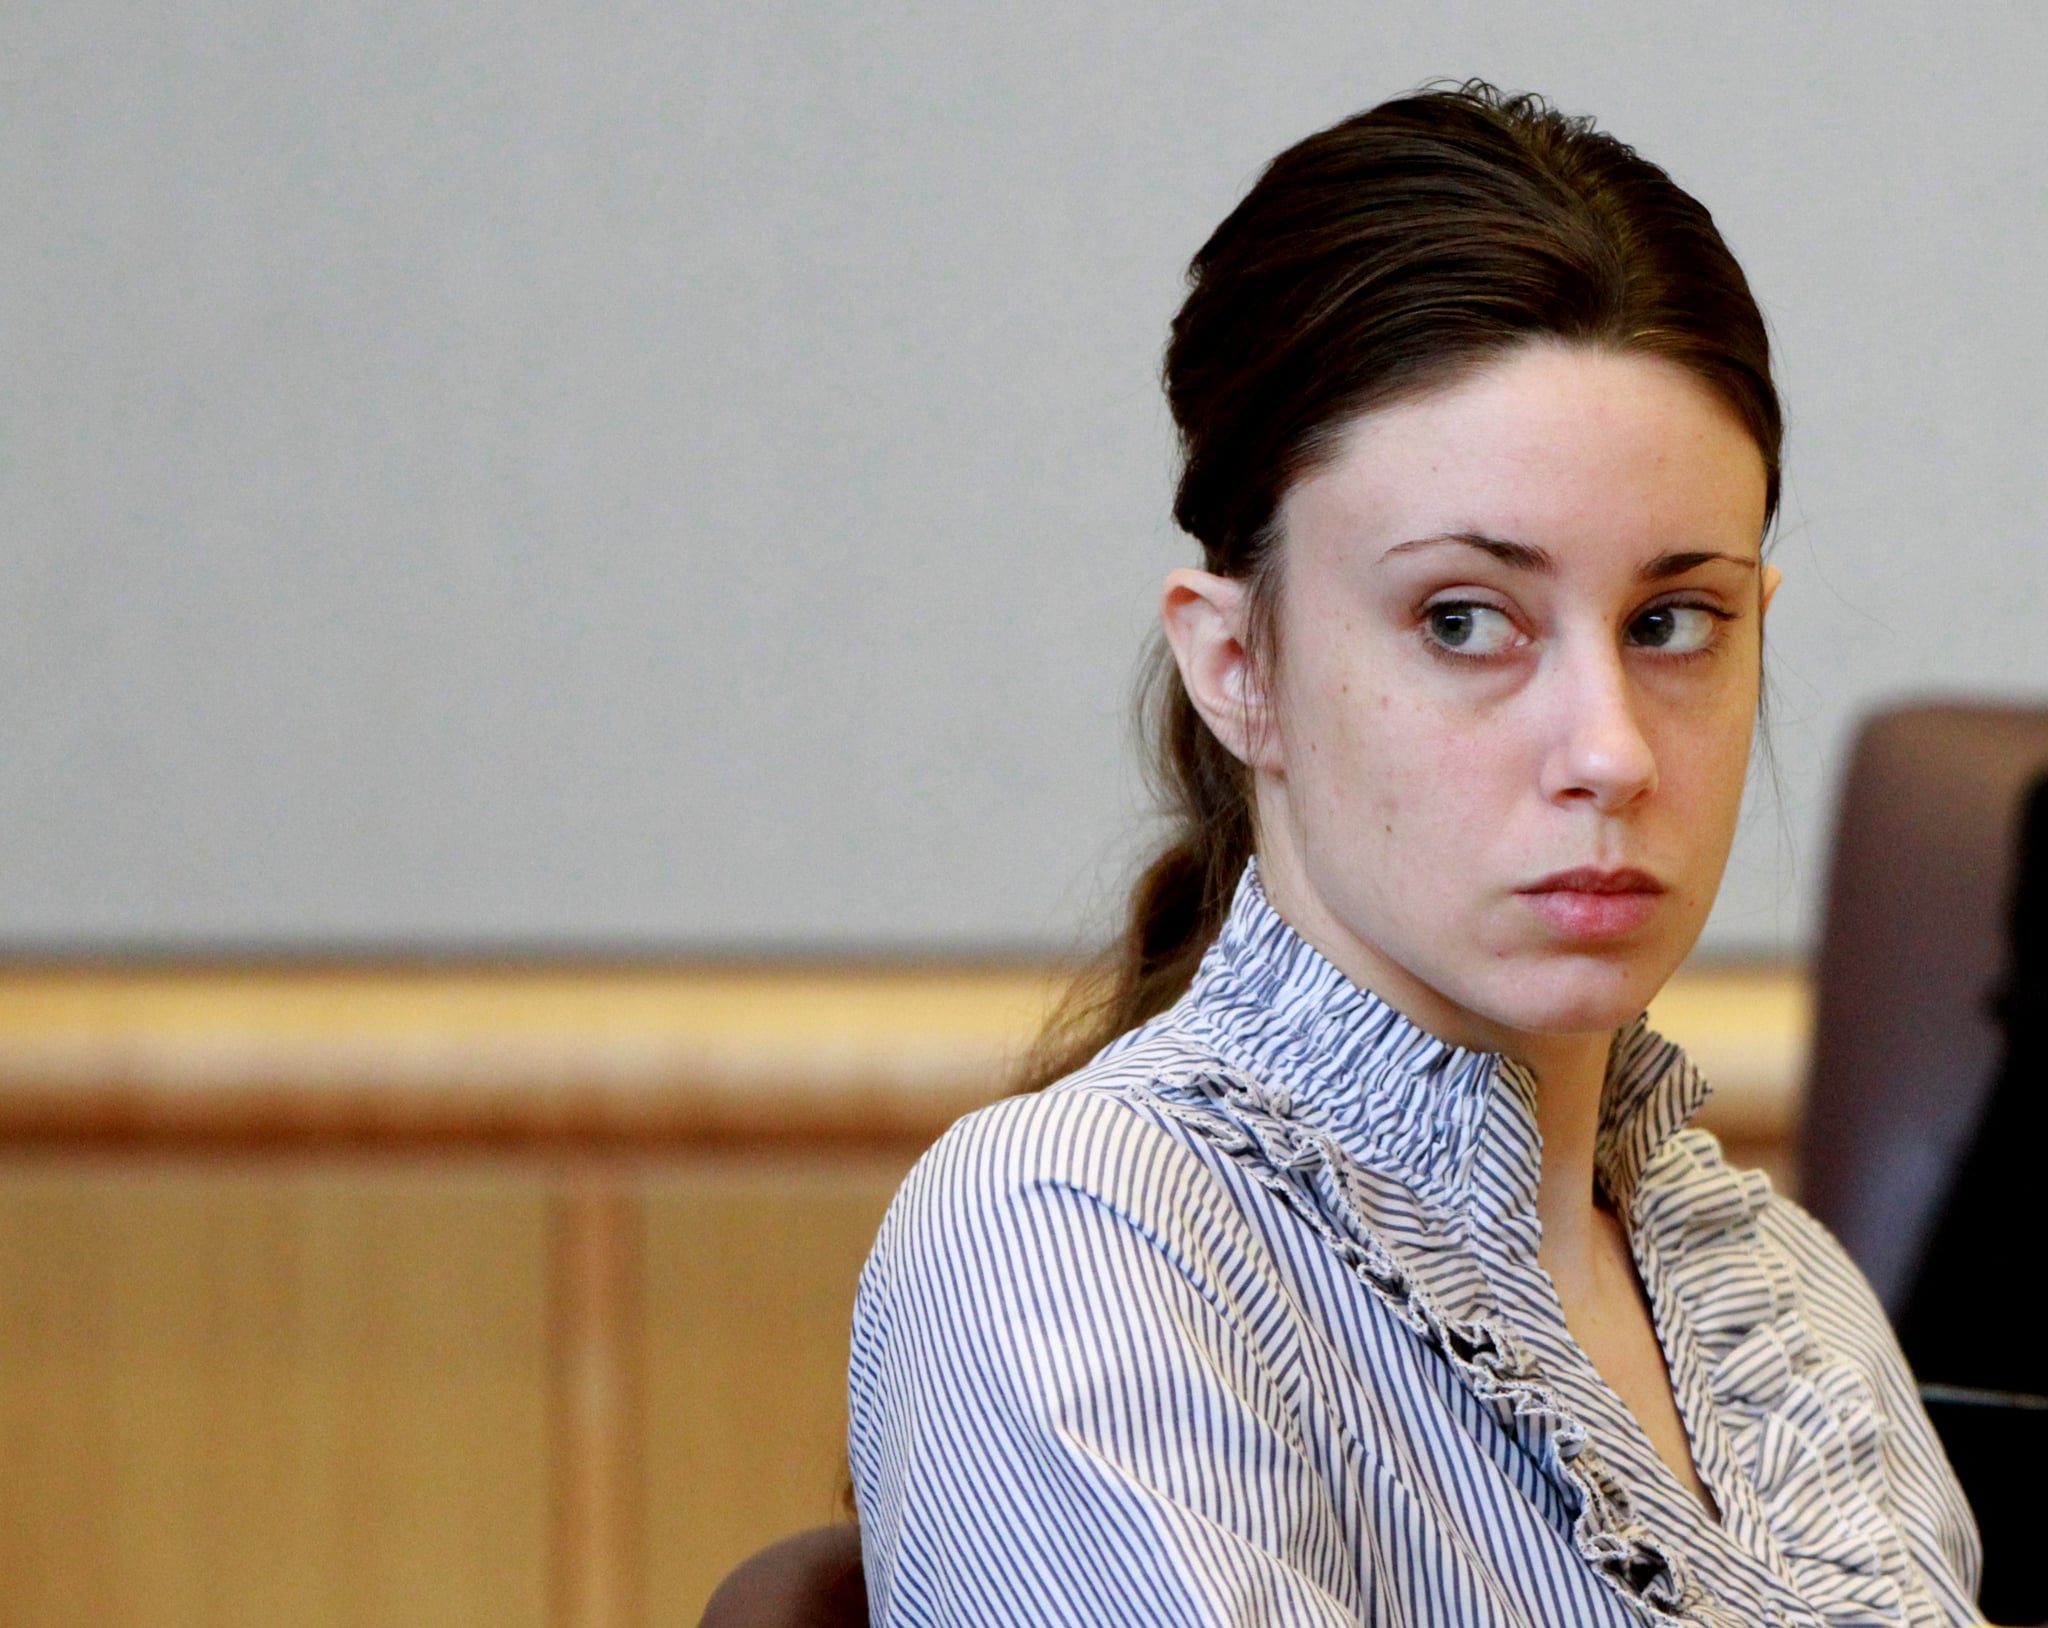 Casey Anthony listens to counsel in the courtroom at the Pinellas County Criminal Justice Centre, Friday morning, May 13, 2011, on the fifth day of jury selection in her trial, in Clearwater, Florida. (Joe Burbank/Orlando Sentinel/Tribune News Service via Getty Images)